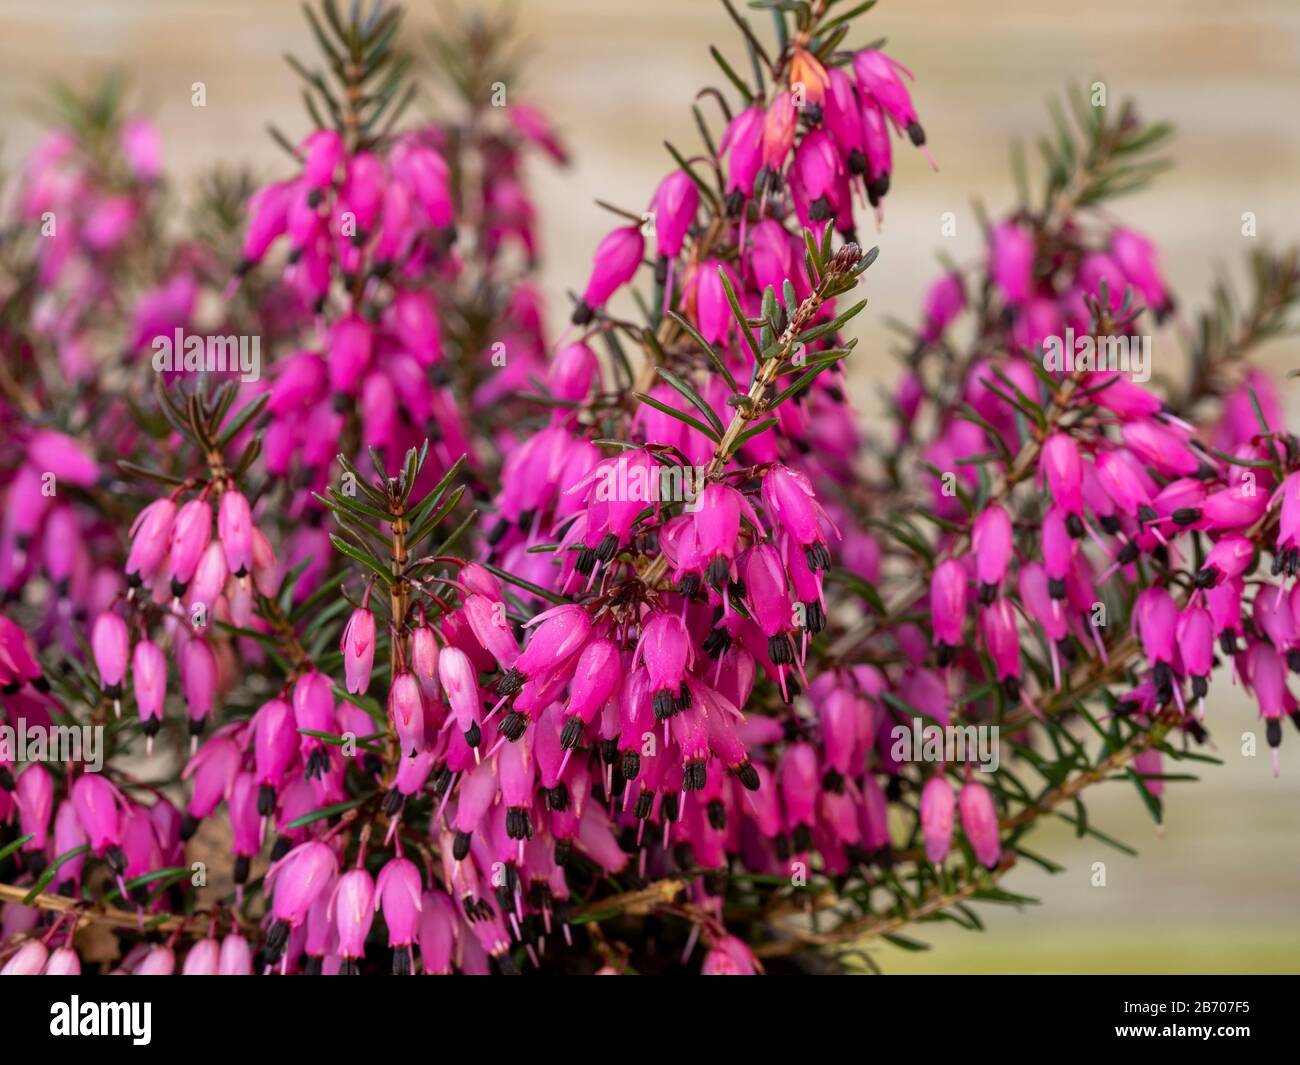 Closeup of the bright pink flowers and green leaves of the heather Erica carnea variety Challenger Stock Photo